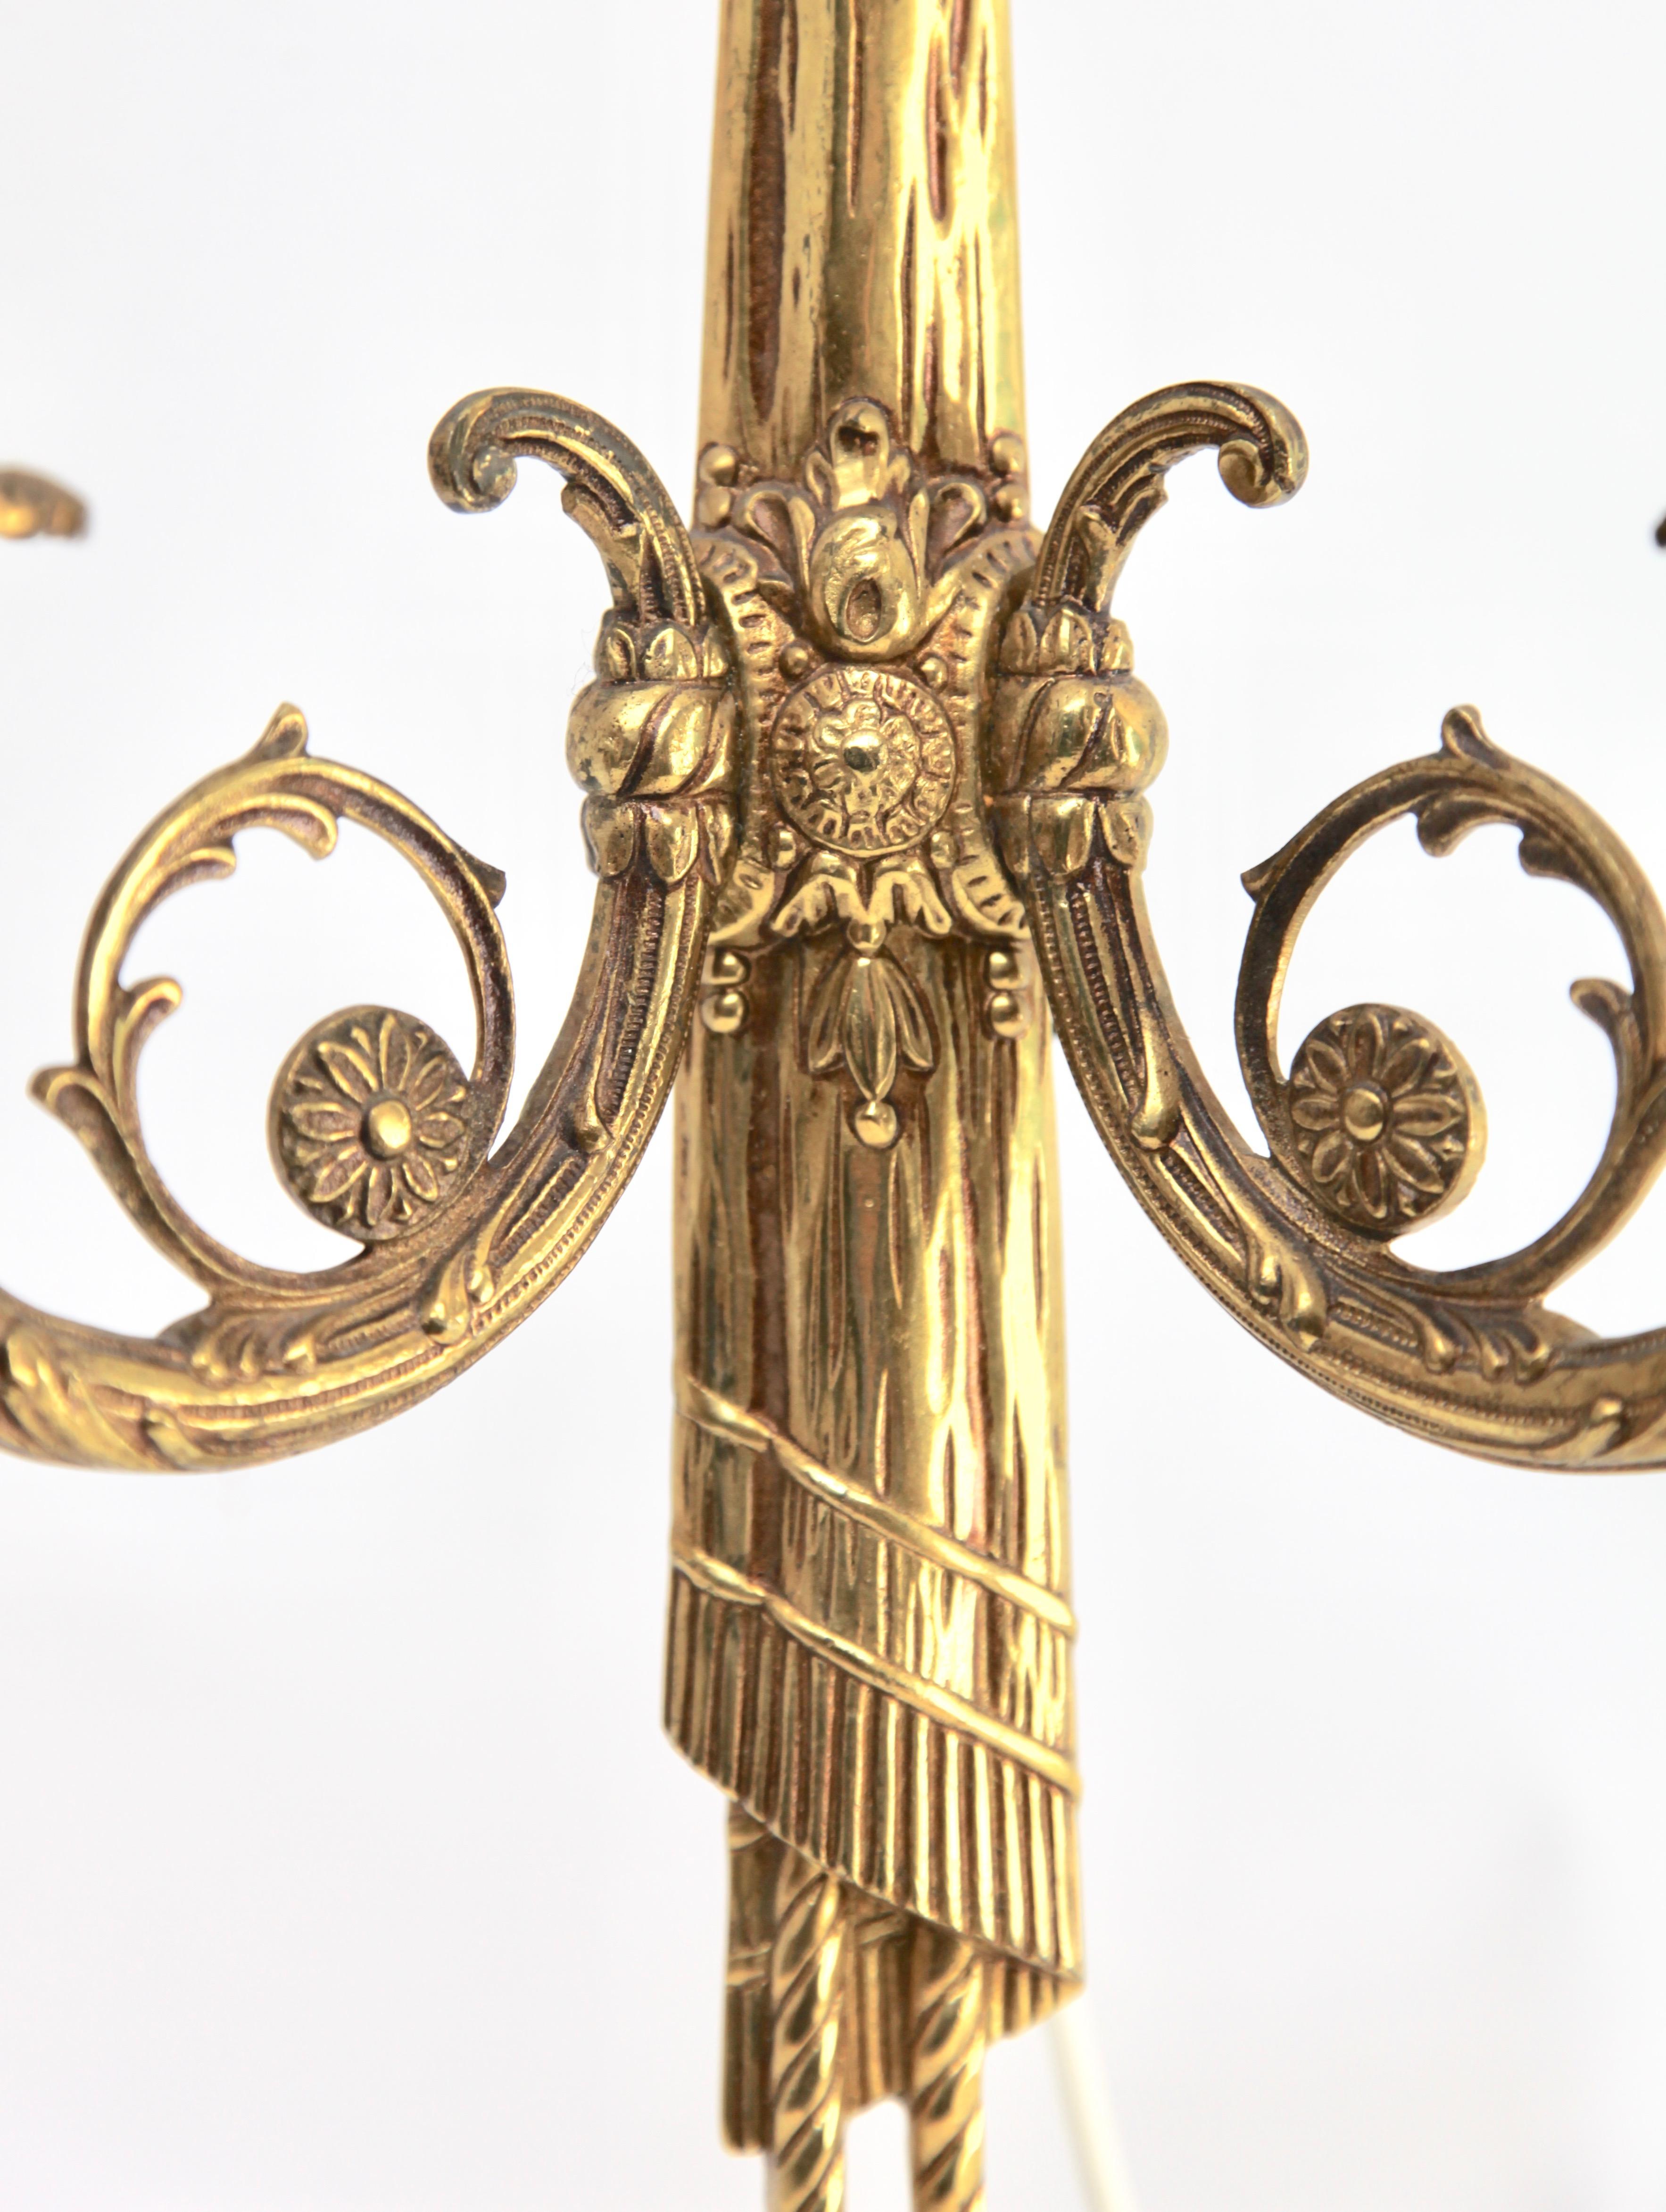 Cast Pair of Brass Two-Light Sconces in Louis XVI Style